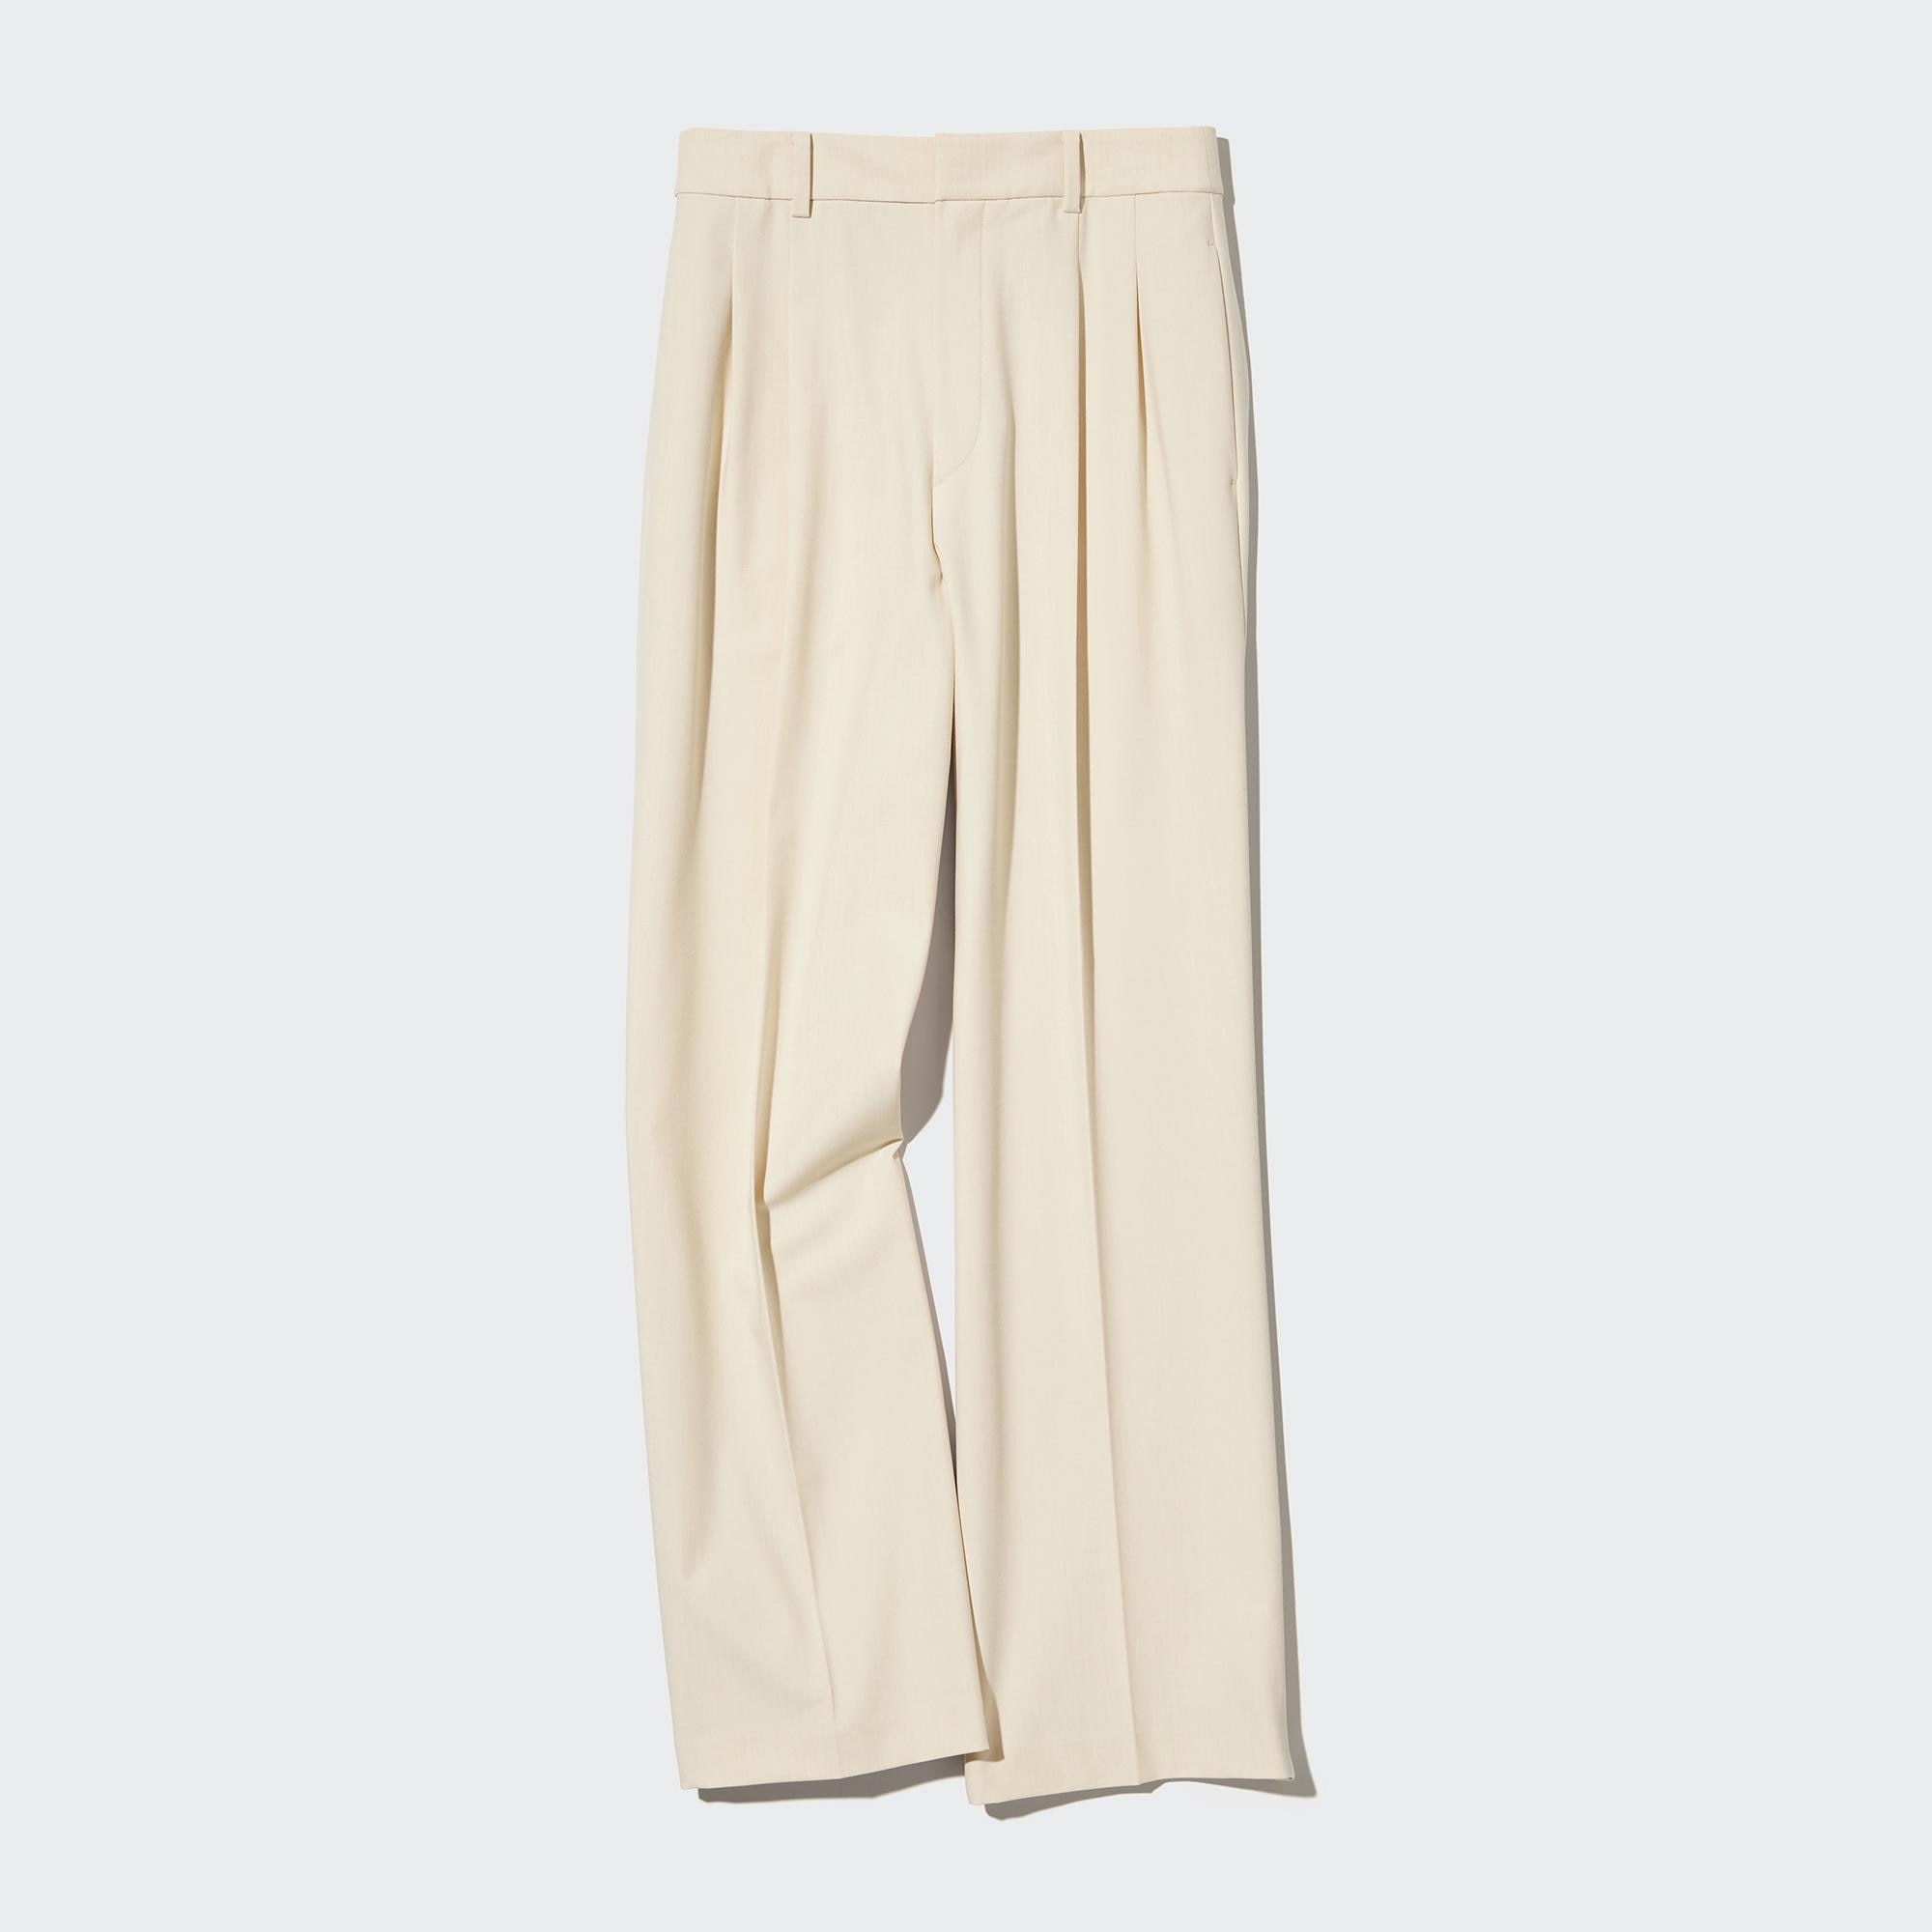 Ask Harry: Pleated Pants